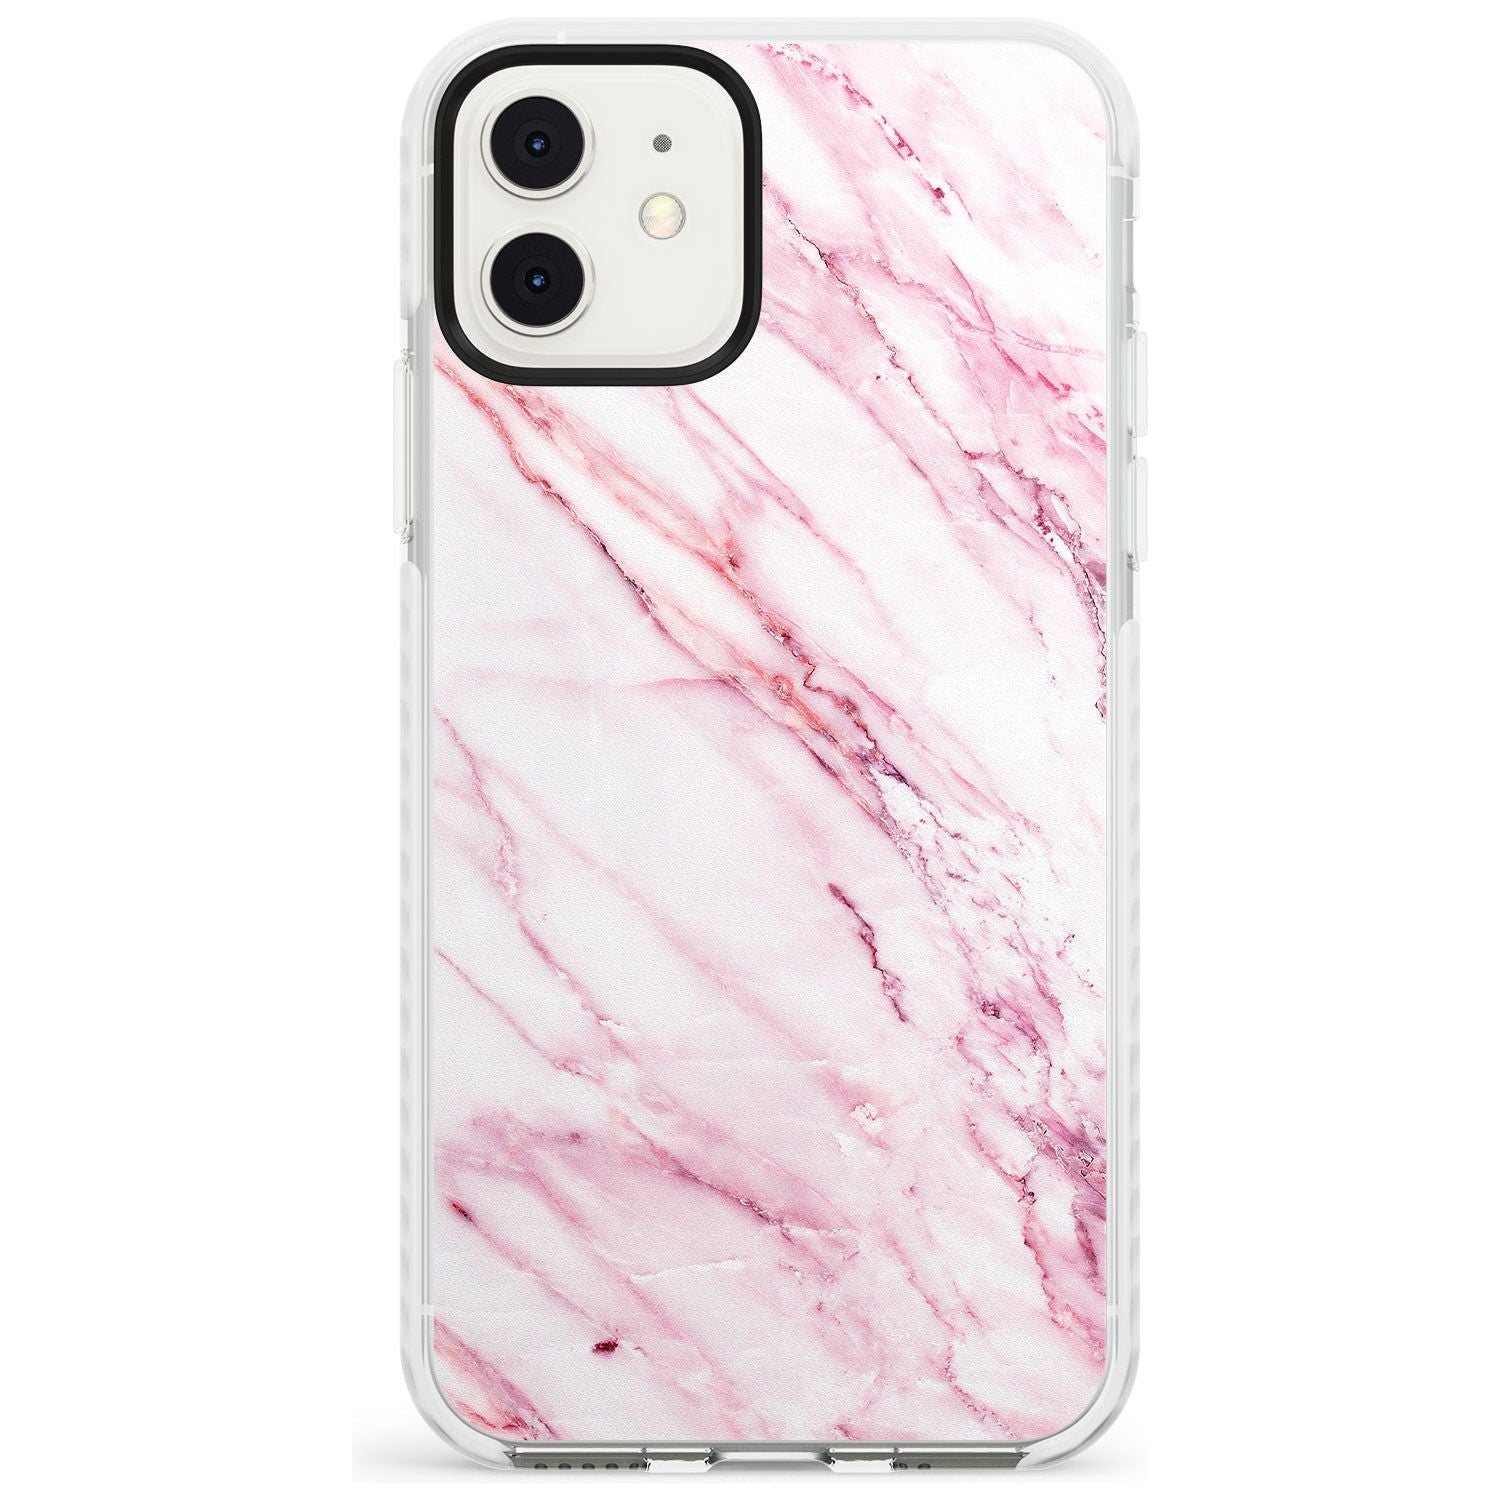 White & Pink Onyx Marble Texture Slim TPU Phone Case for iPhone 11